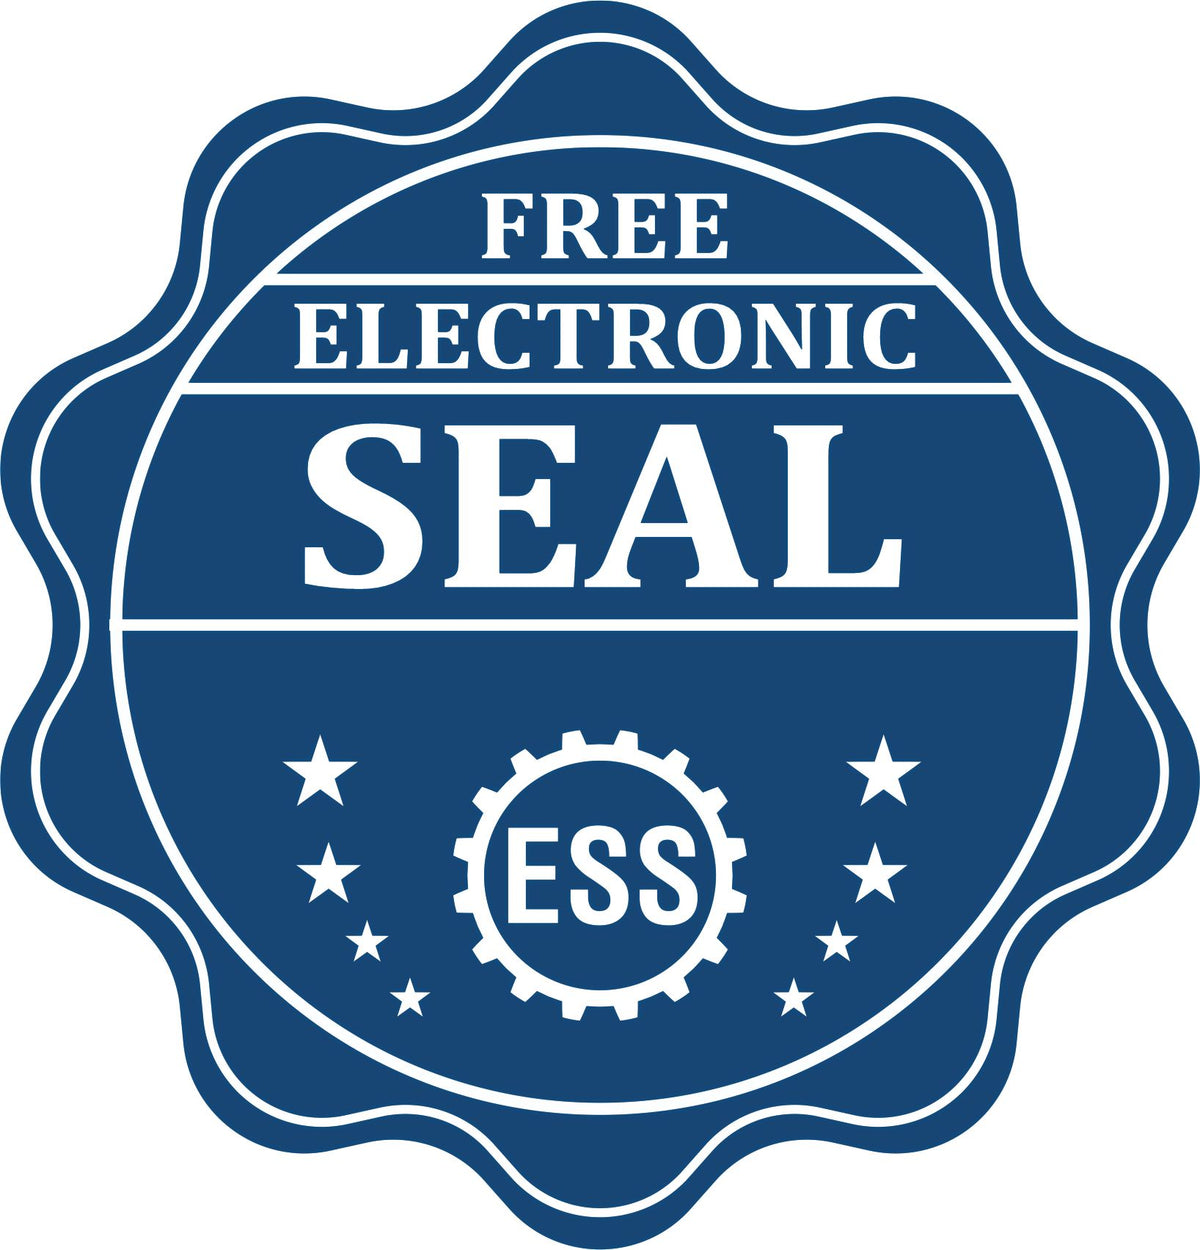 A badge showing a free electronic seal for the Massachusetts Geologist Desk Seal with stars and the ESS gear on the emblem.